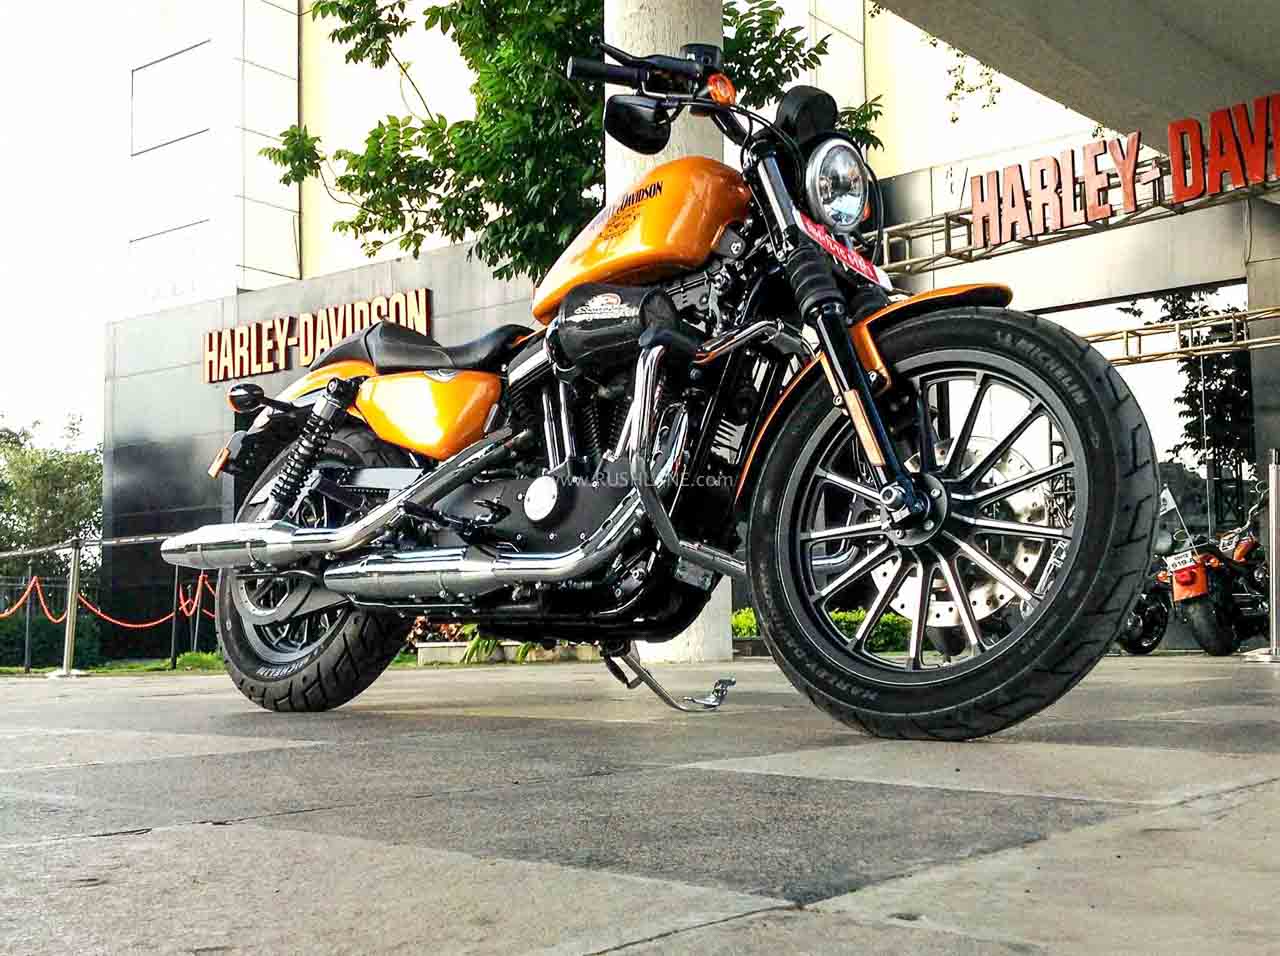 Harley Davidson Cheapest Bike Price In India Promotion Off68